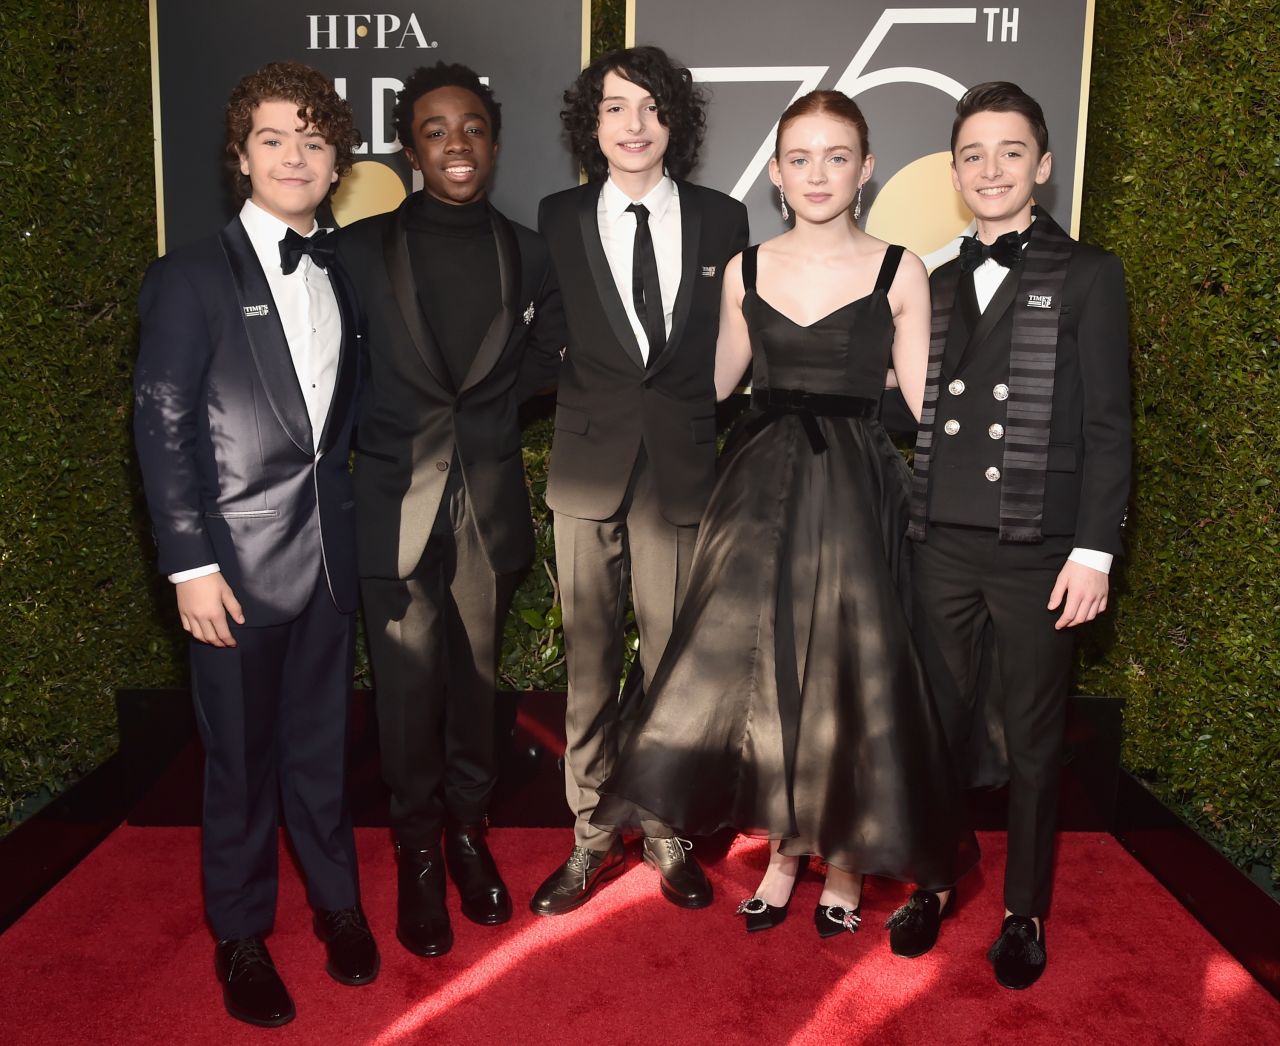 K is for Kids: The cast of popular Netflix show "Stranger Things" looked adorable as they hit the red carpet in 2018.(LR: Gaten Matarazzo, Caleb McLaughlin, Finn Wolfhard, Sadie Sink and Noah Schnapp)